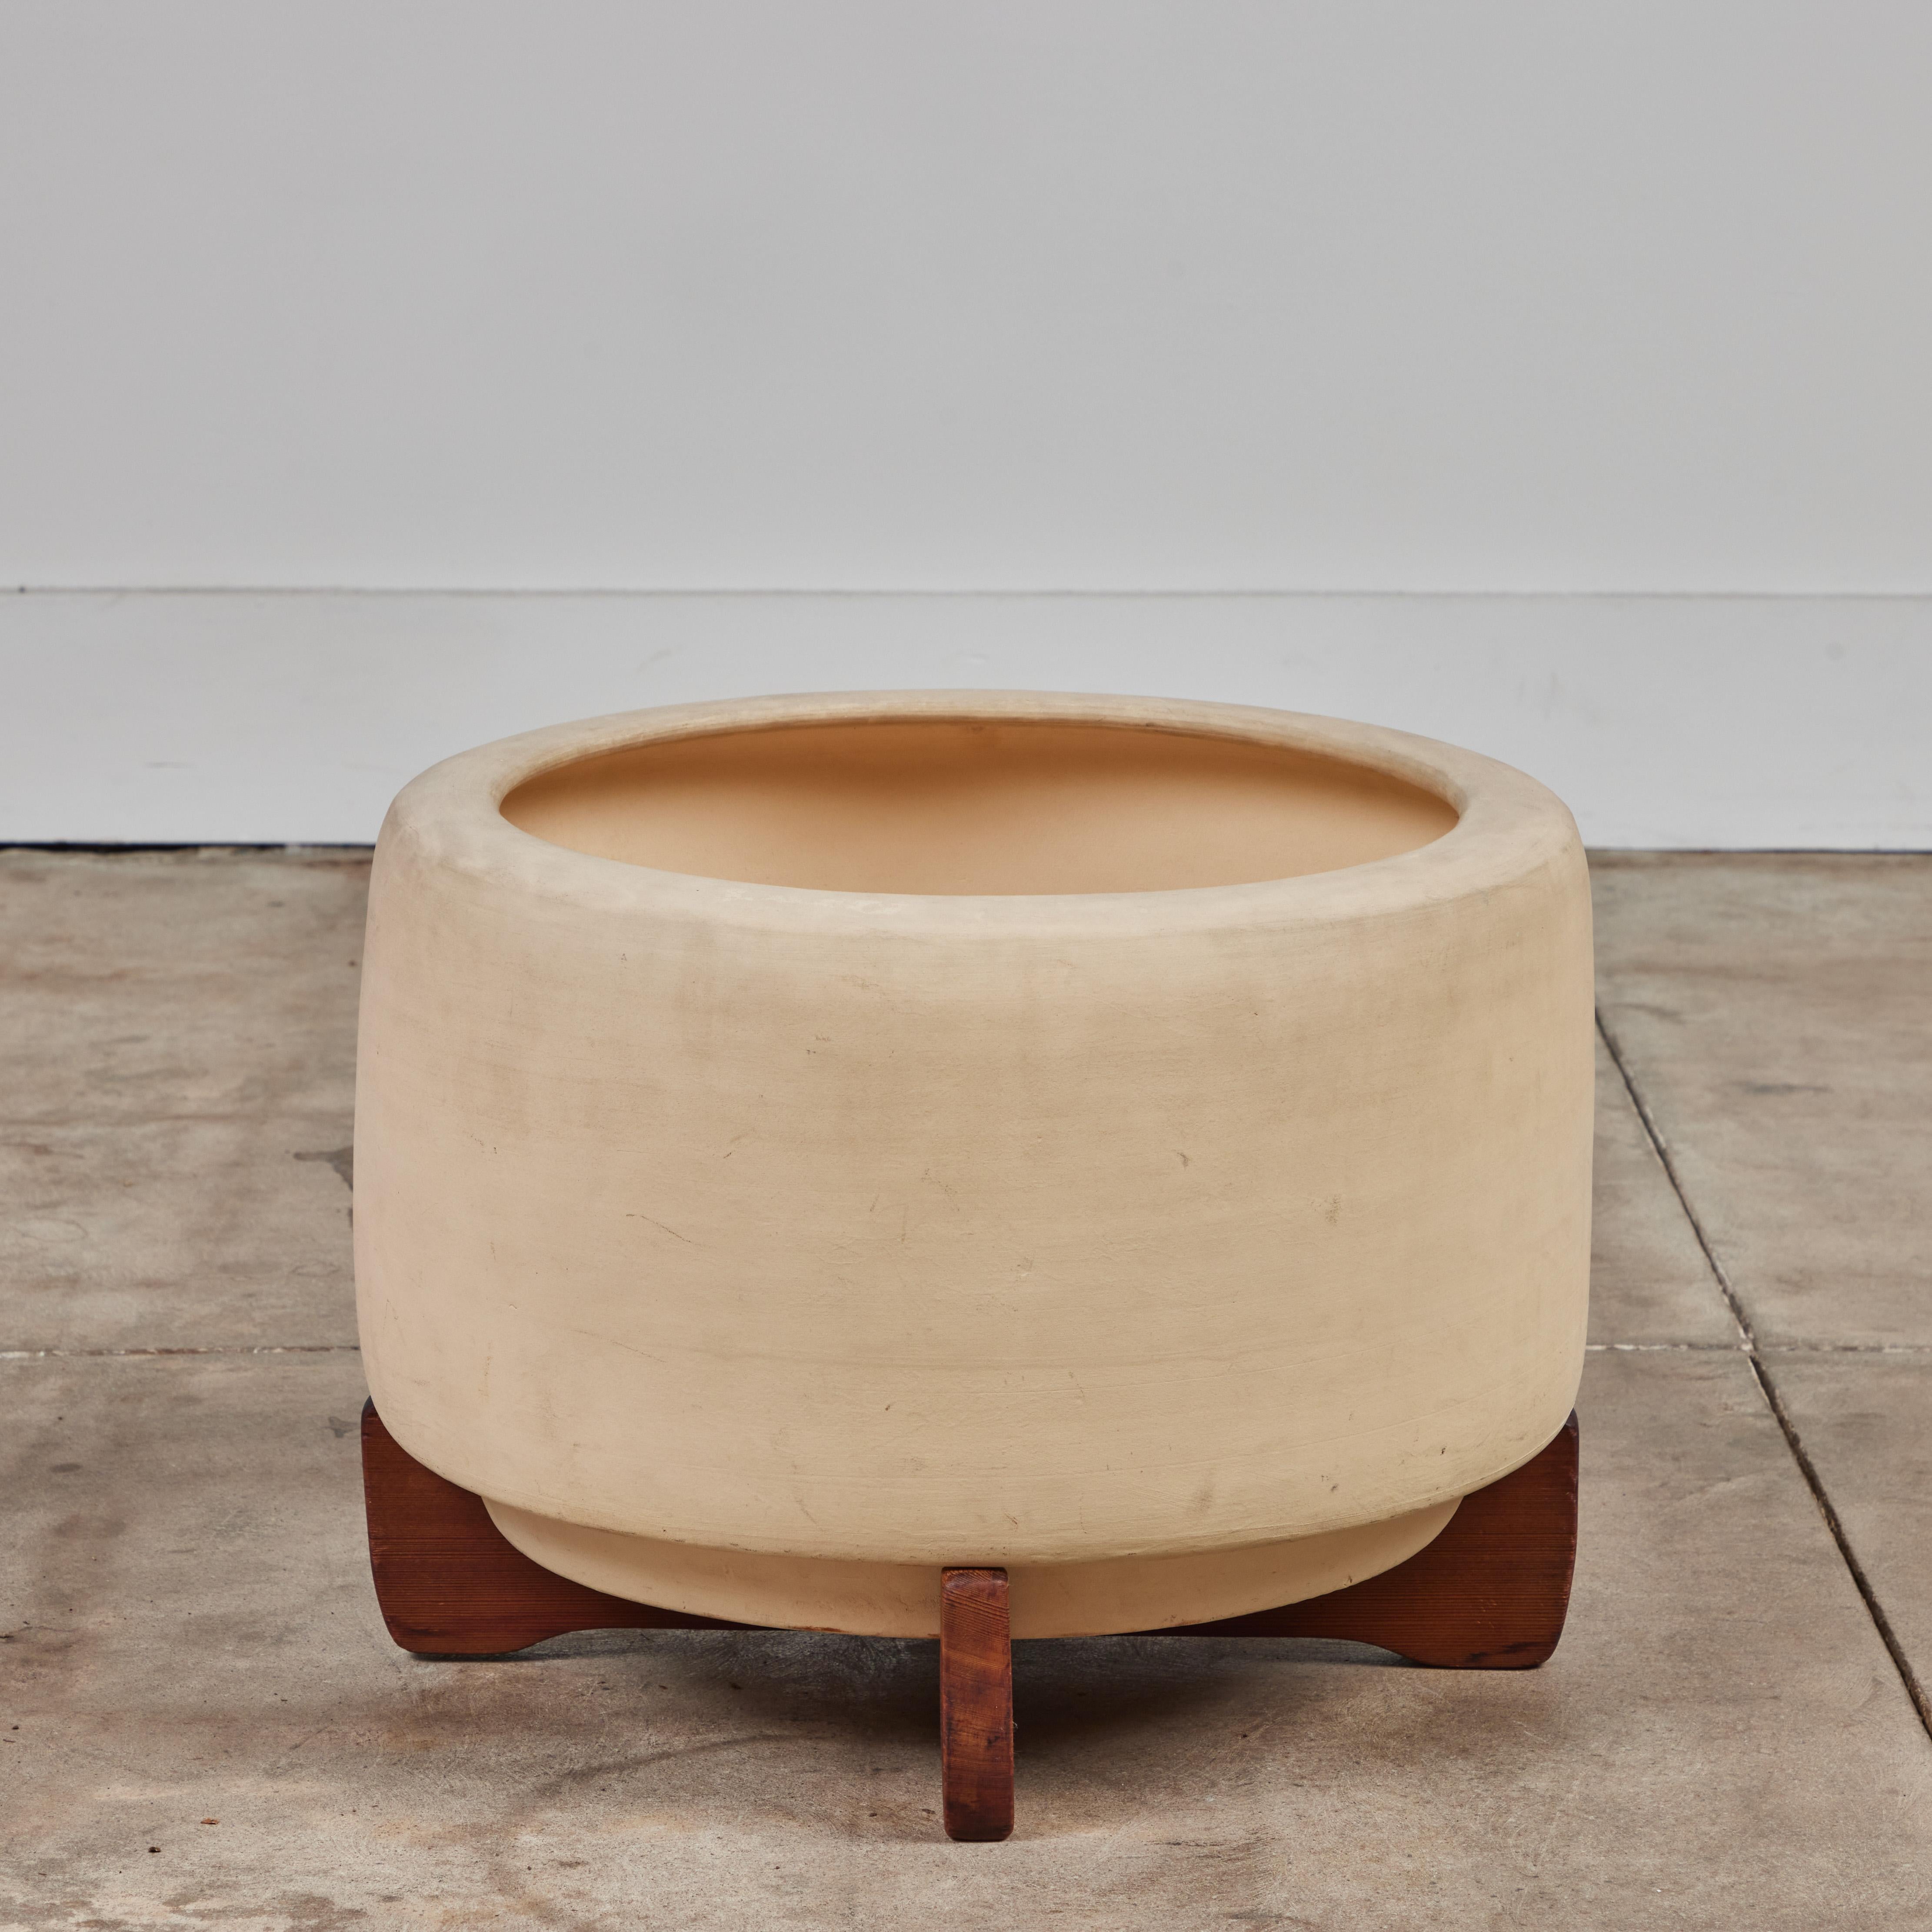 Bisque planter by John Follis for Architectural Pottery. This example has a drum shape with a rounded lip that curves in at the top of the piece. It rests on original wood cross base frame.
Planter is stamped “Architectural Pottery Made in the USA.”